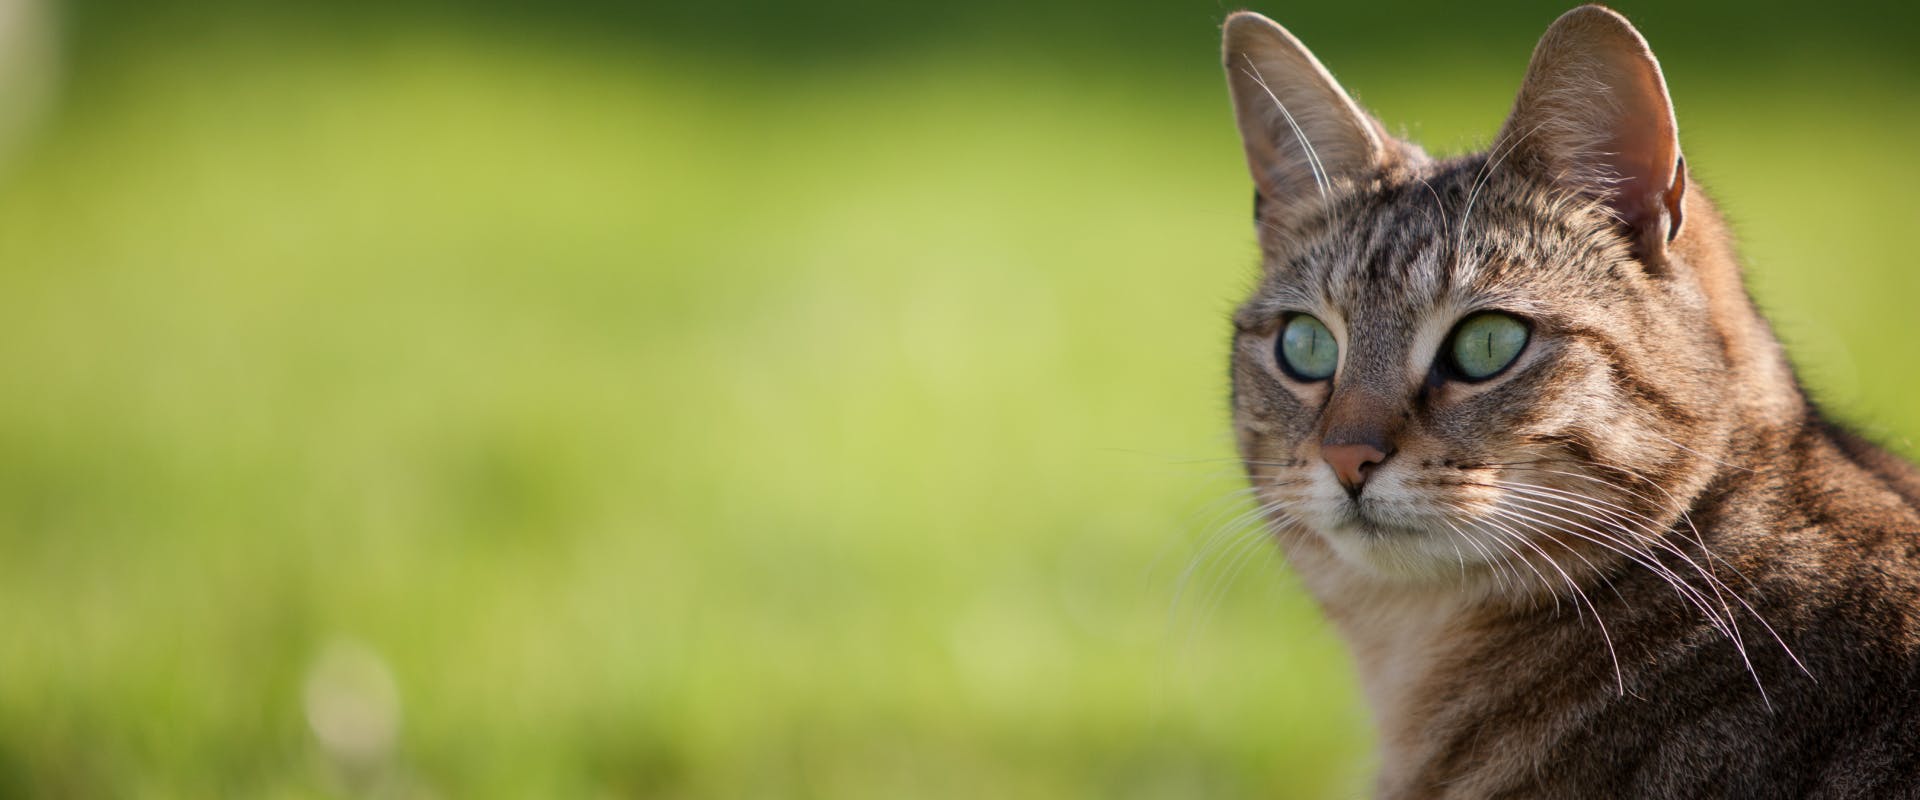 tabby cat with green eyes cat in a field